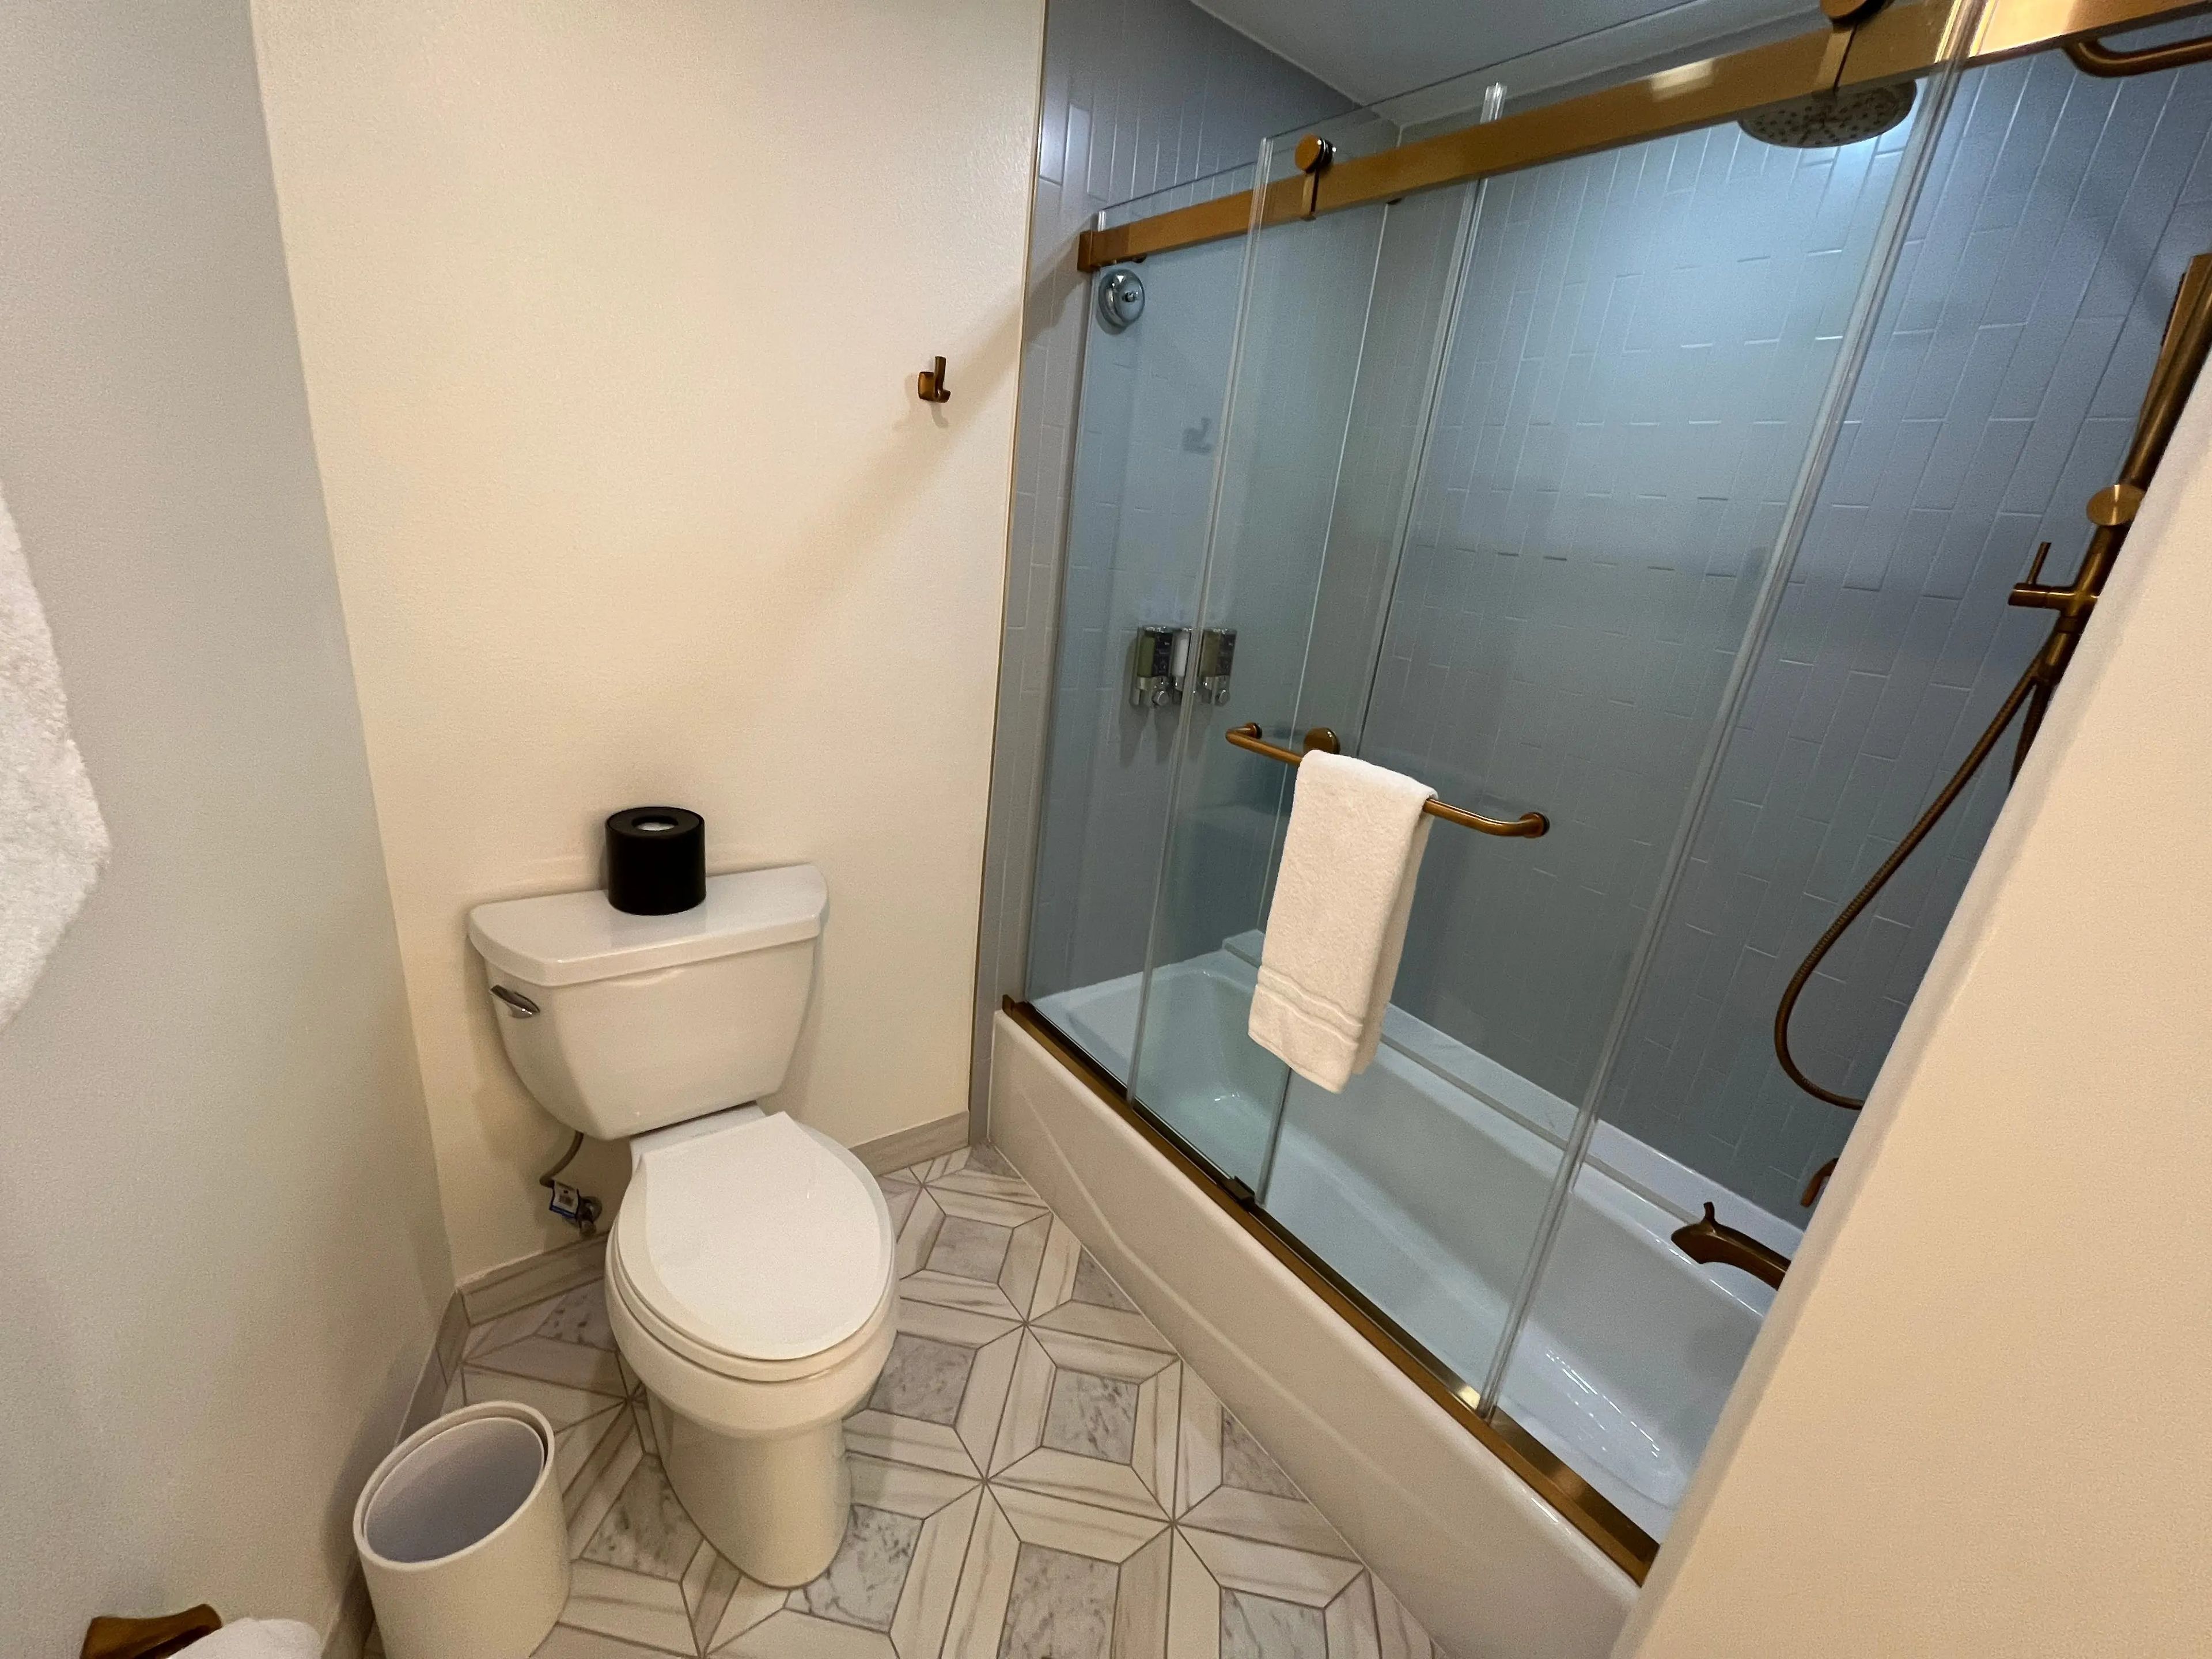 toilet and shower/tub with sliding door in the bathroom of a room at the grand floridian resort